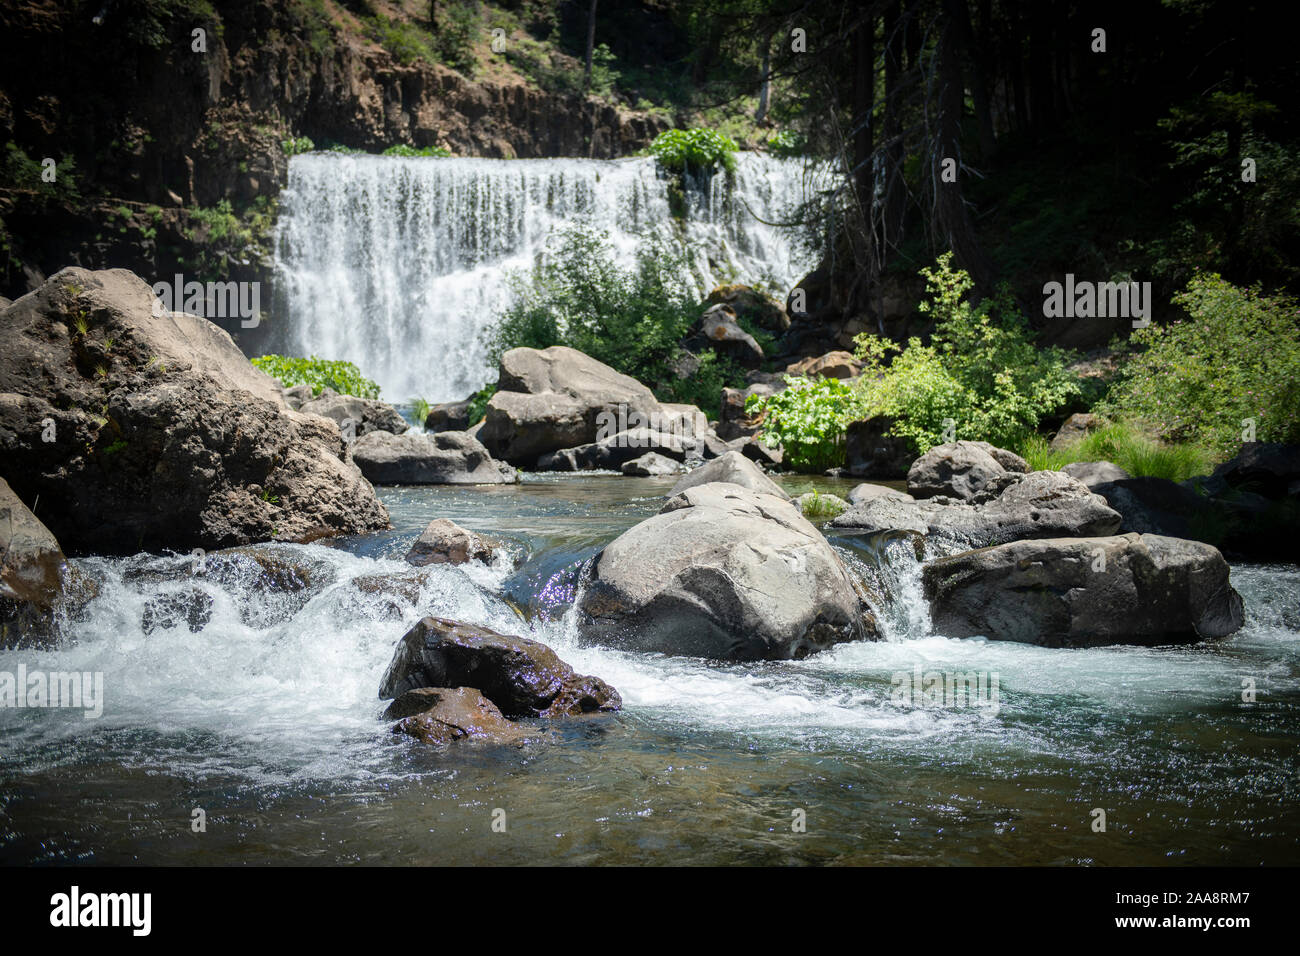 Rocky creek with wide low waterfall in the background Stock Photo